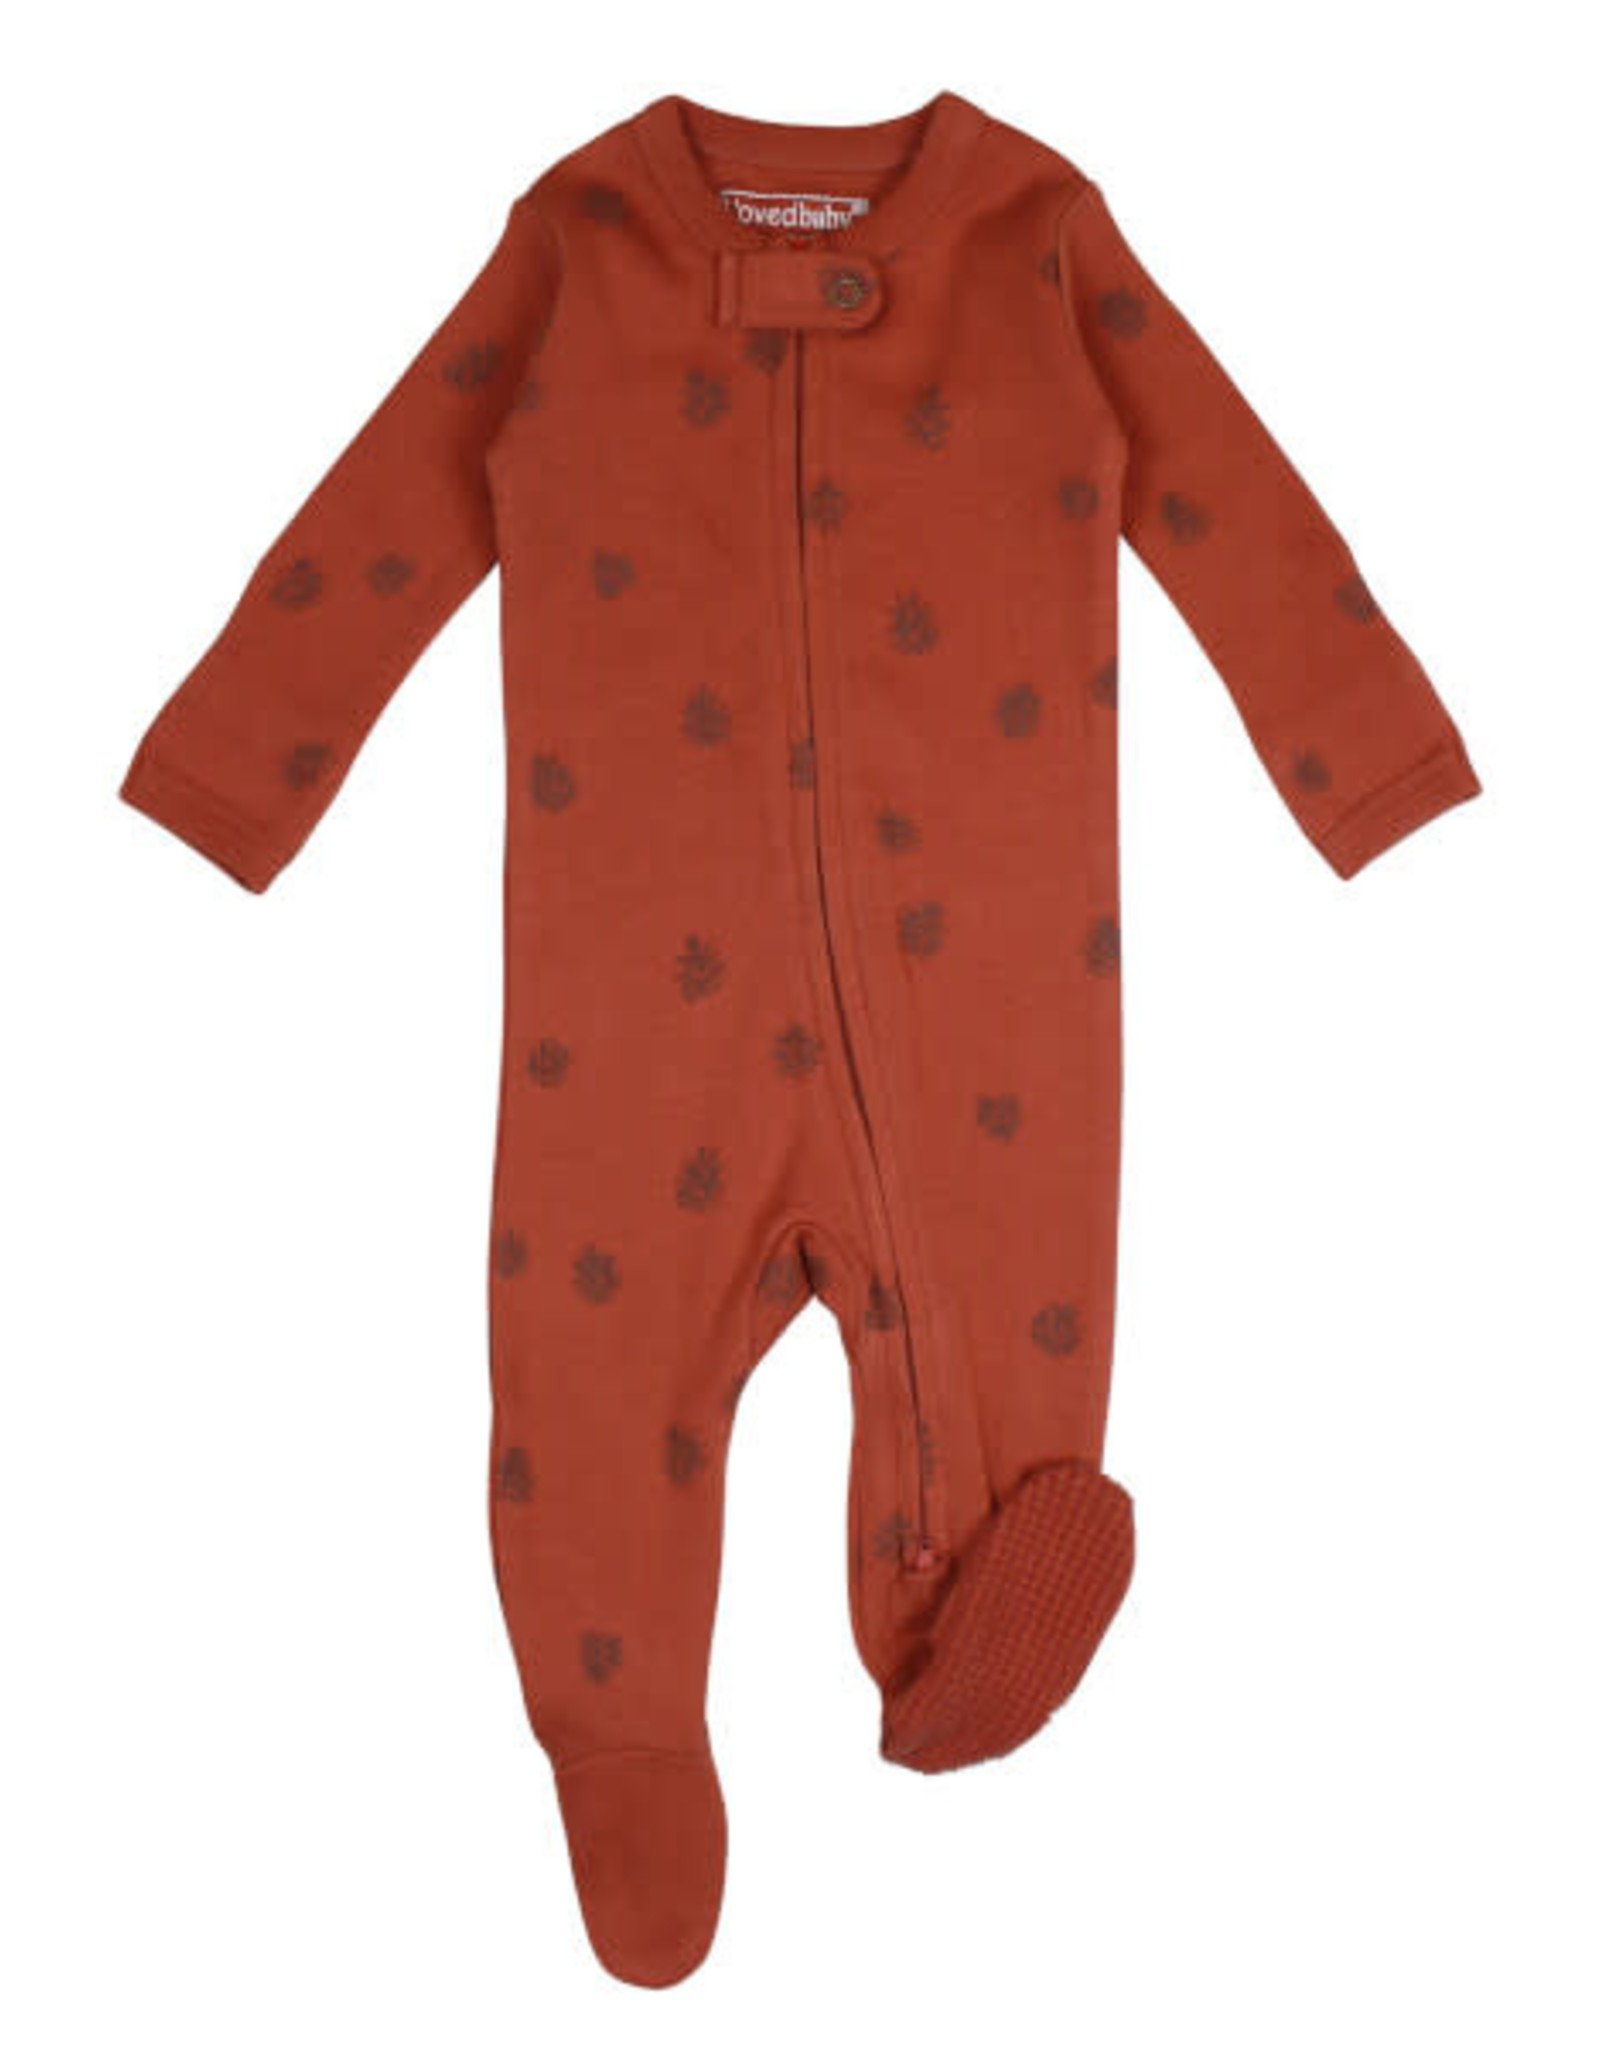 L'oved Baby Cinnamon Zippered Footie with Pinecone Print